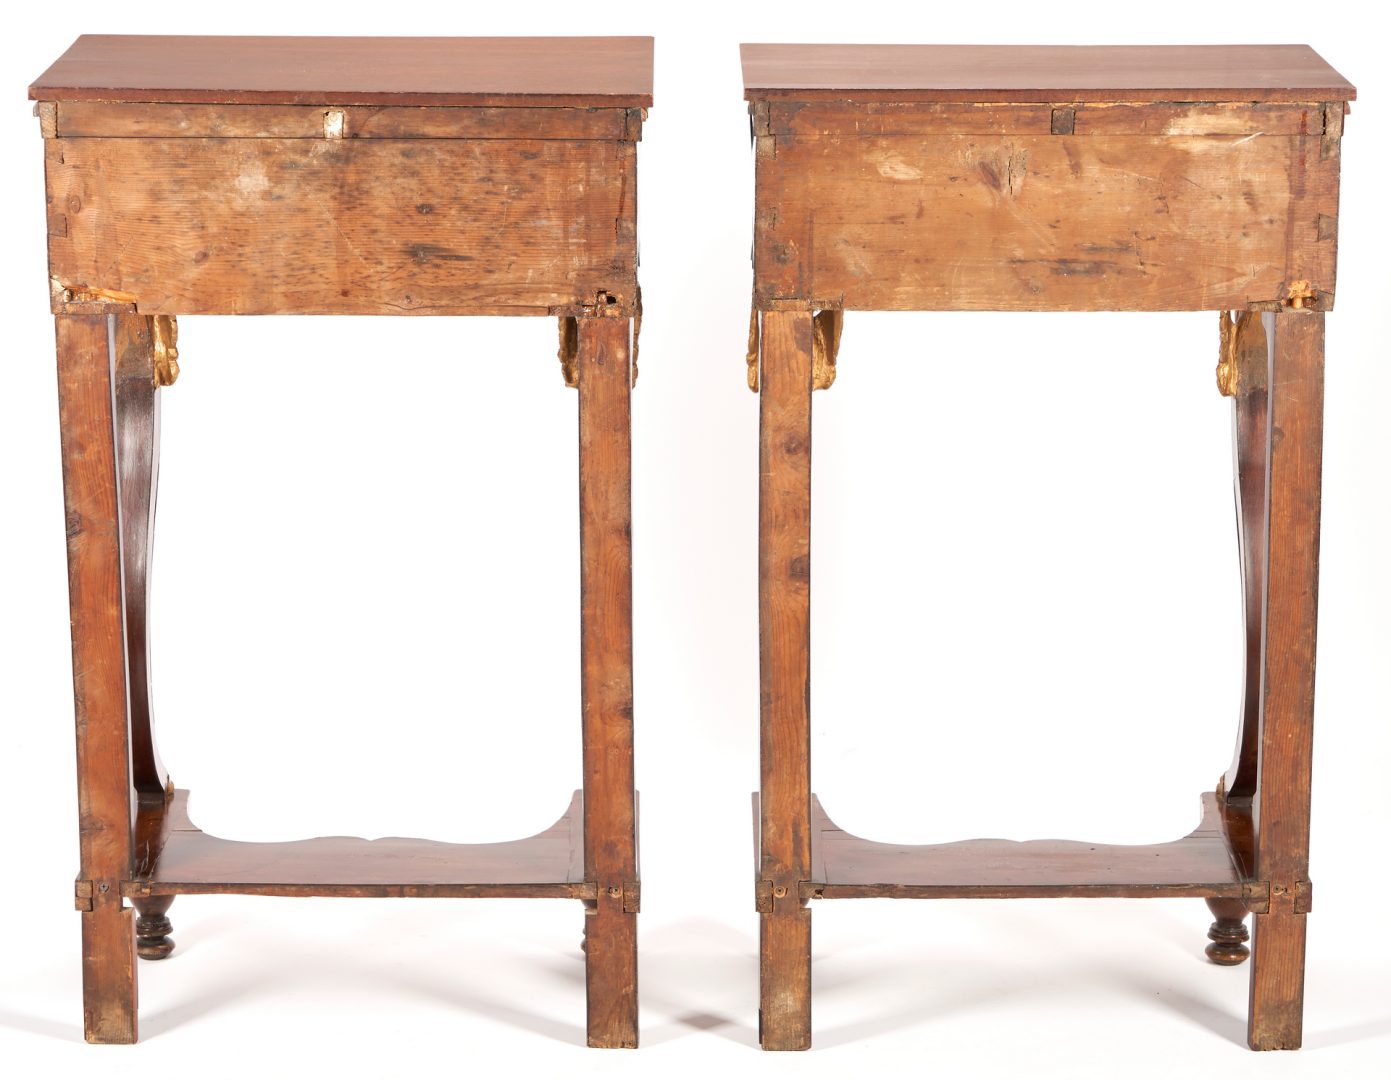 Lot 995: Pair Continental Classical Pier Tables